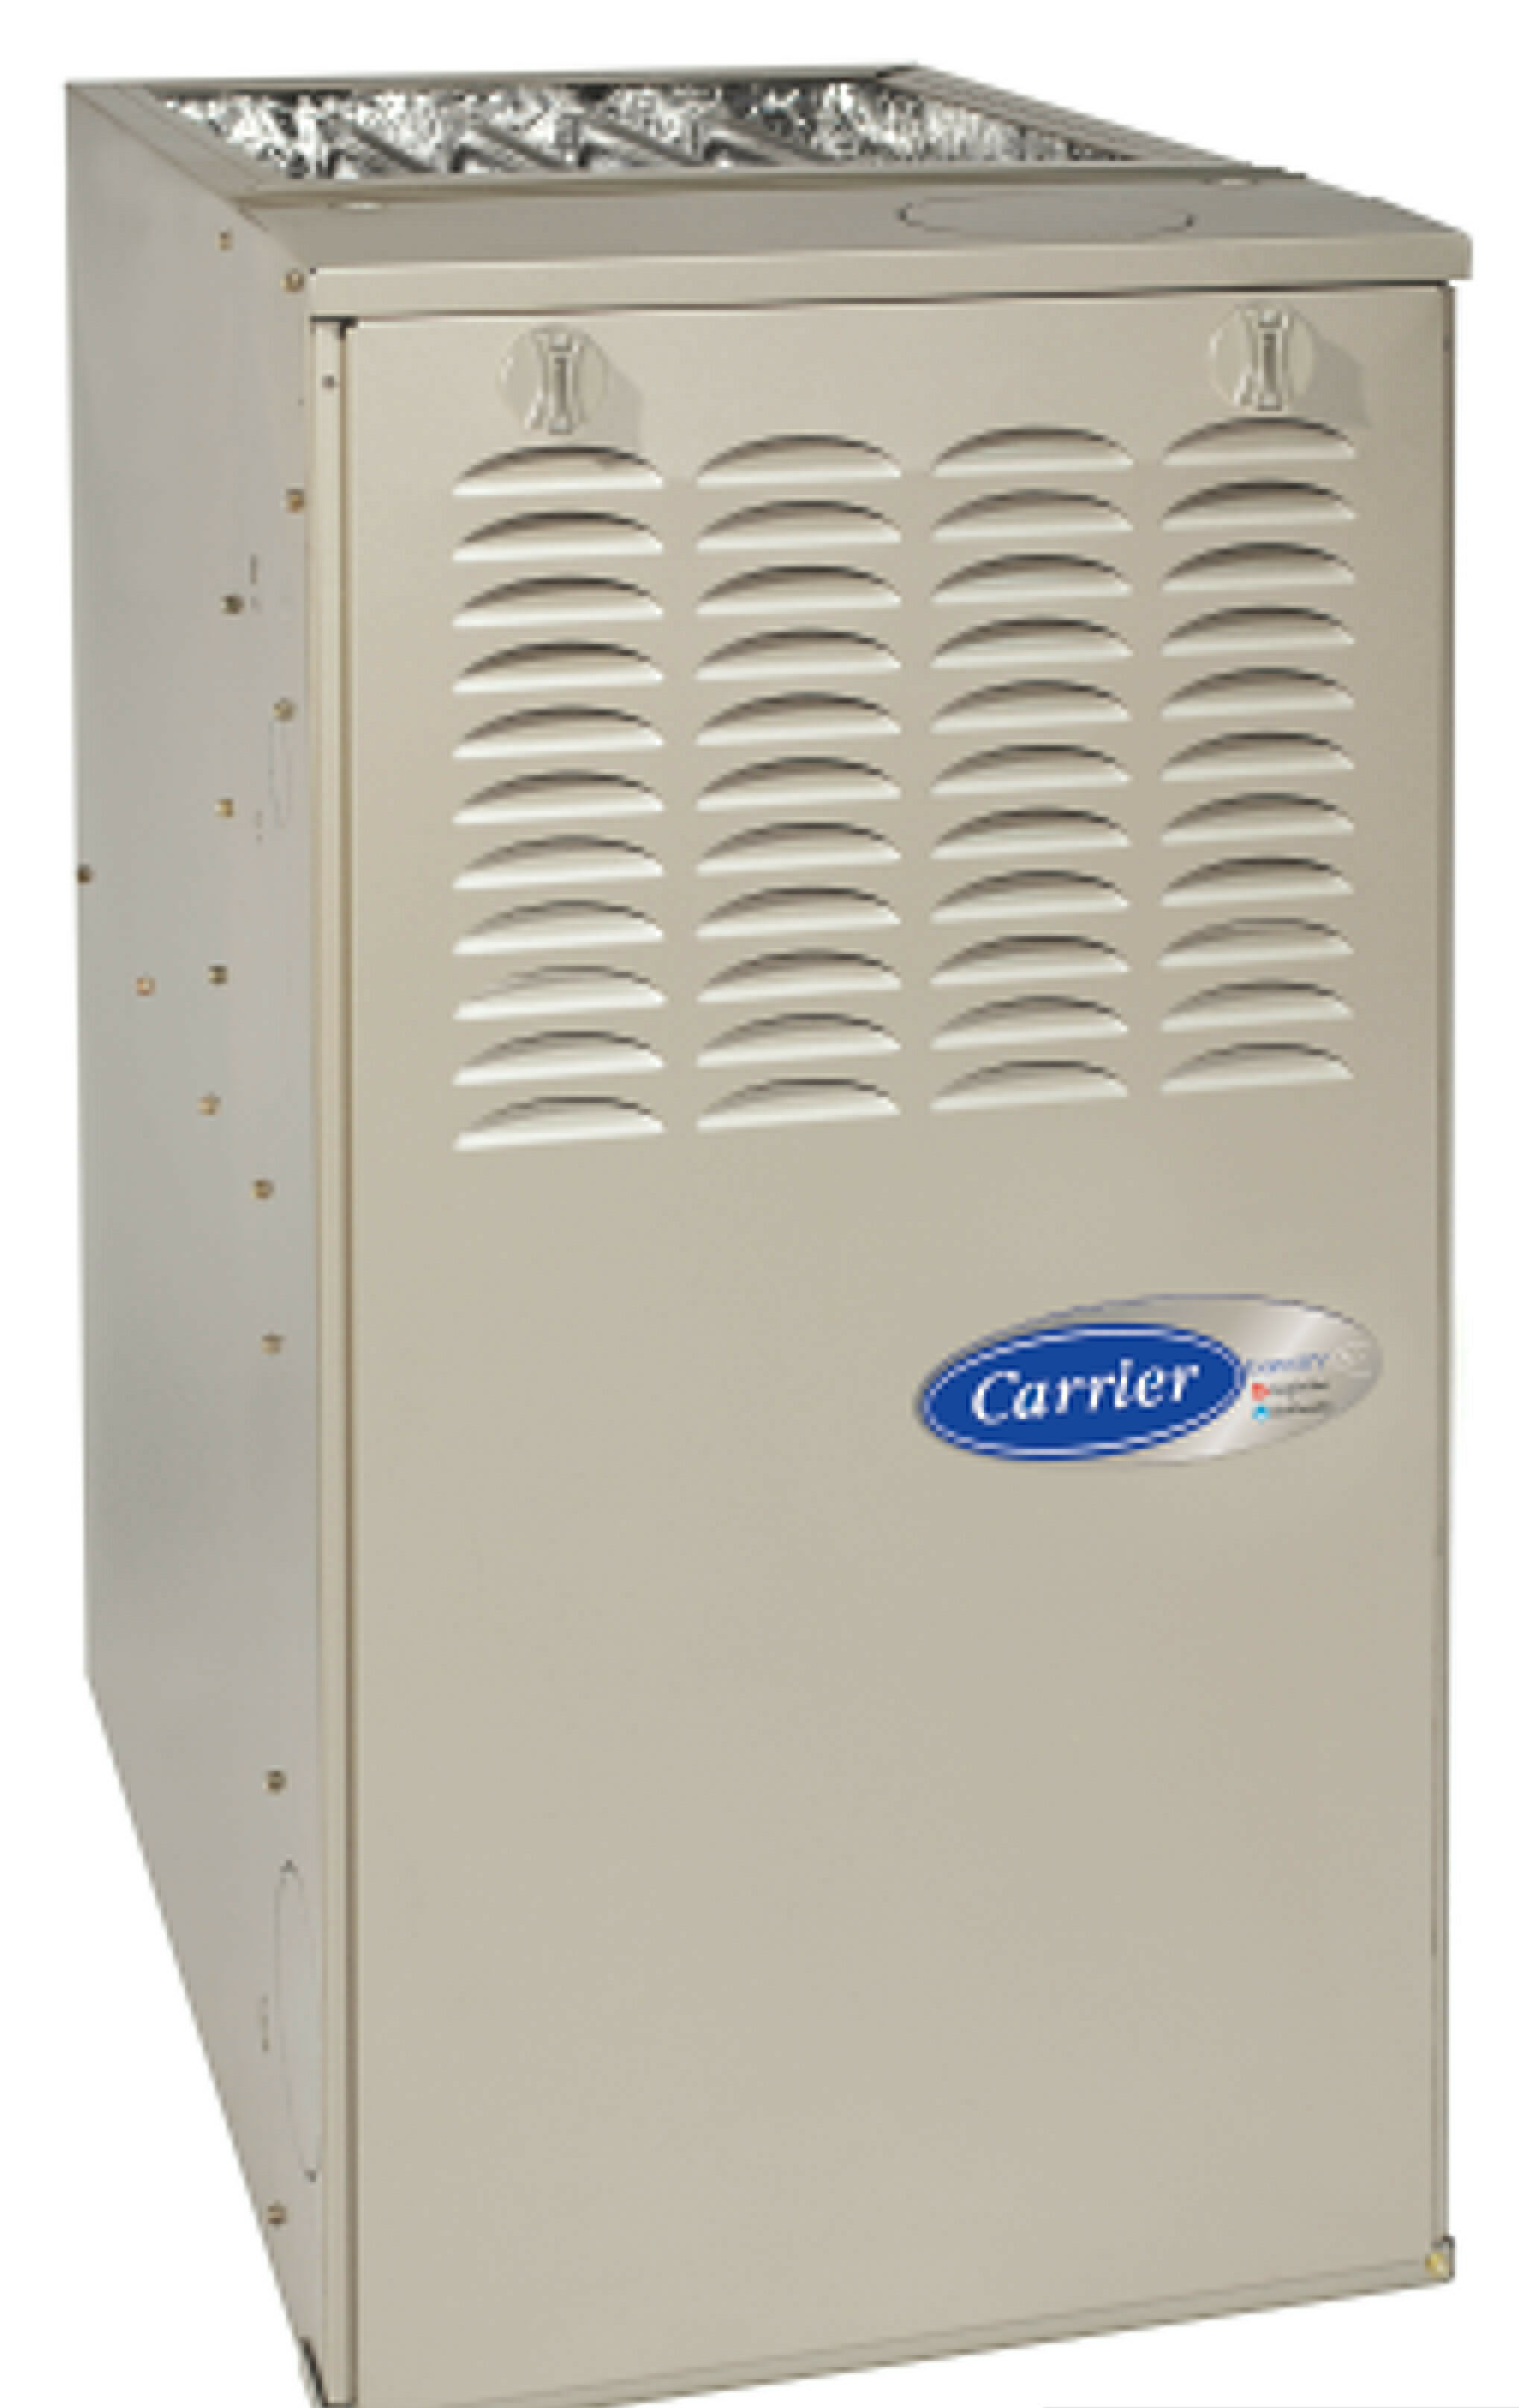 Carrier heating system